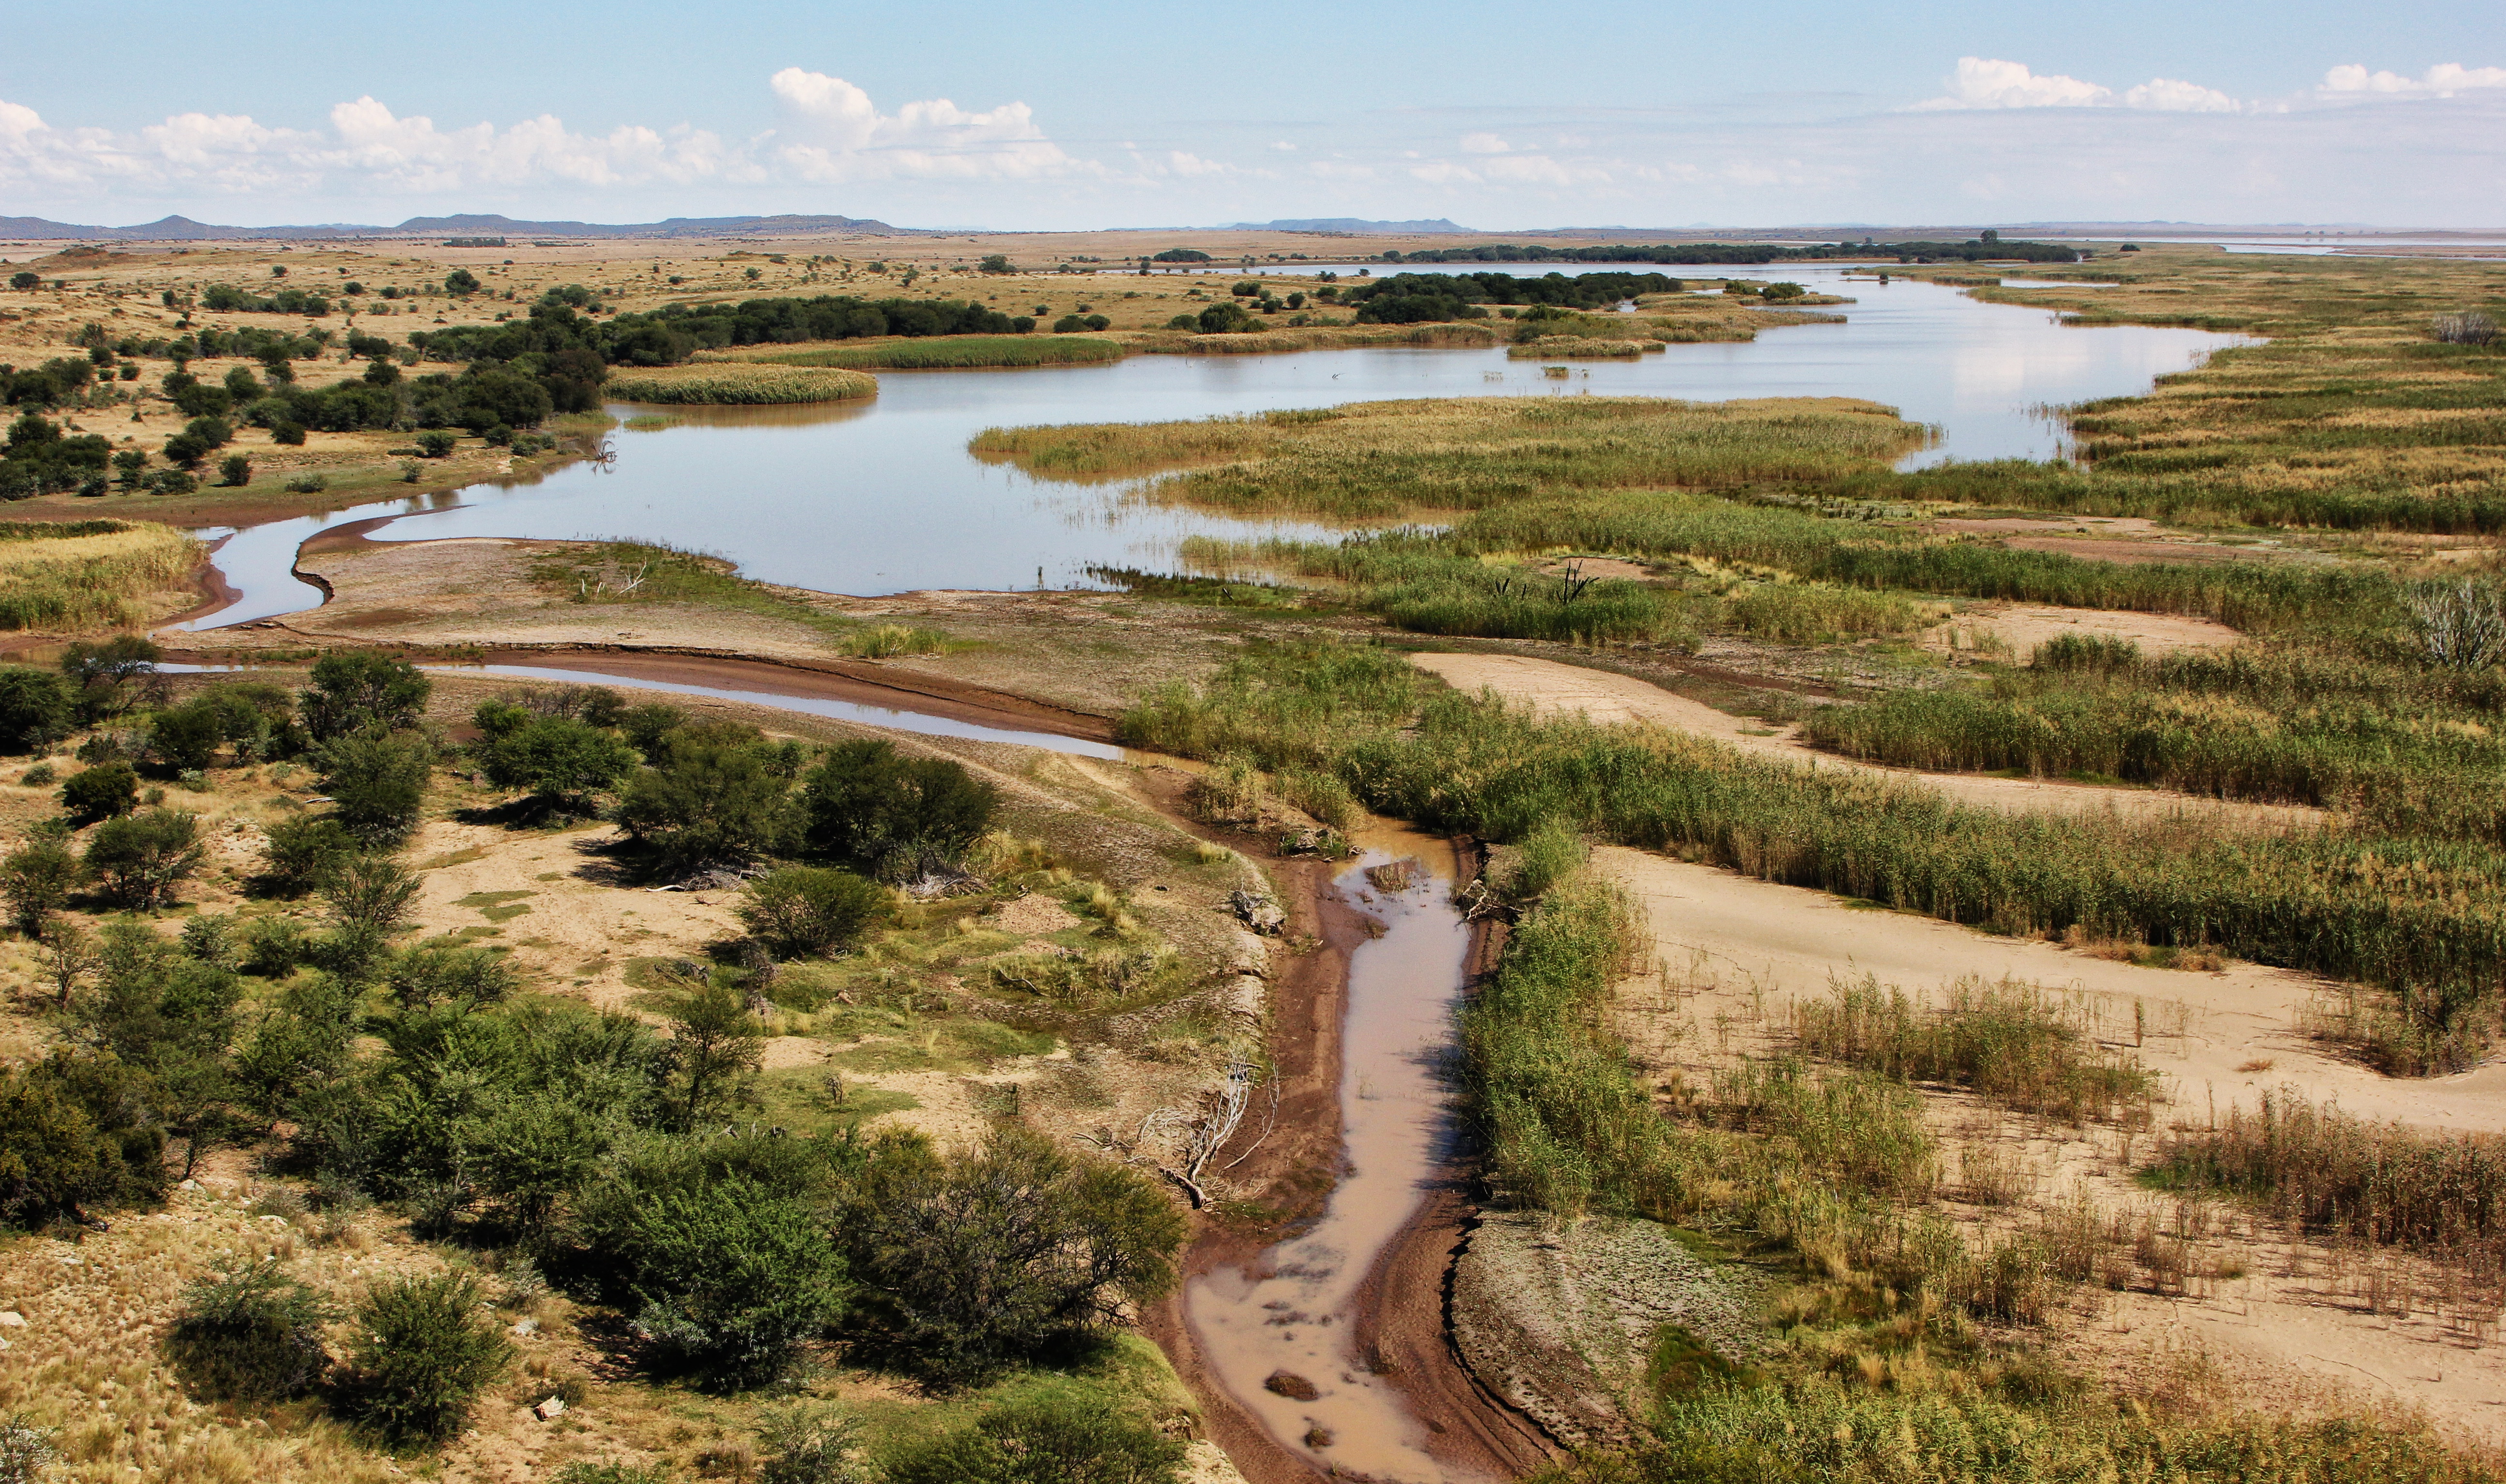 The channels formed by the Orange River as it flows into the dam near Bethulie. Image: Chris Marais